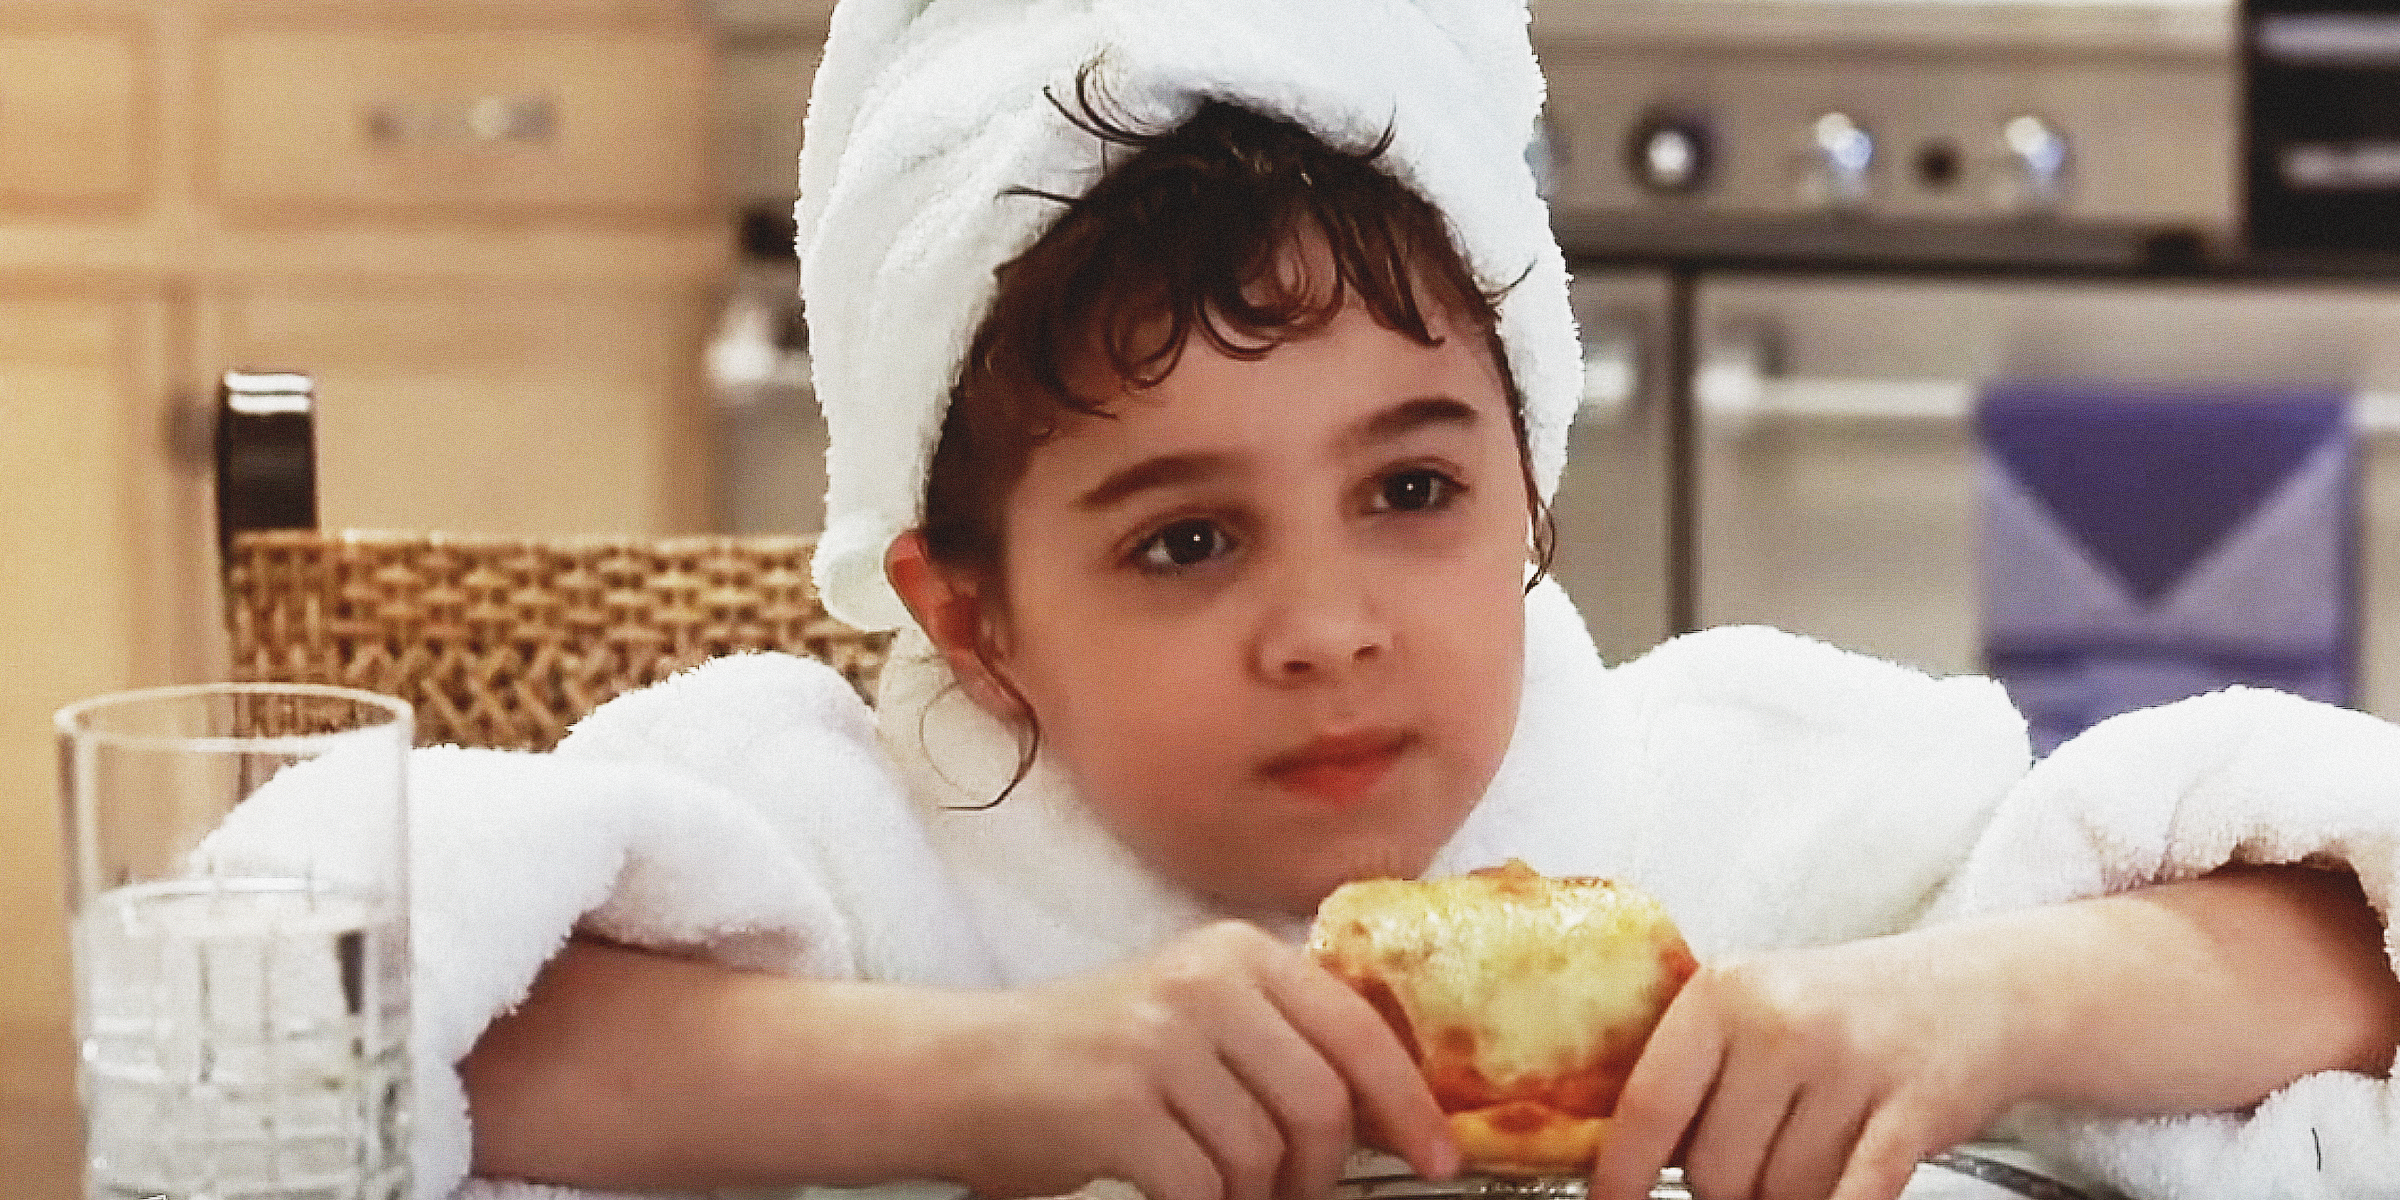 The child star | Source: Youtube/@MOVIECLIPS